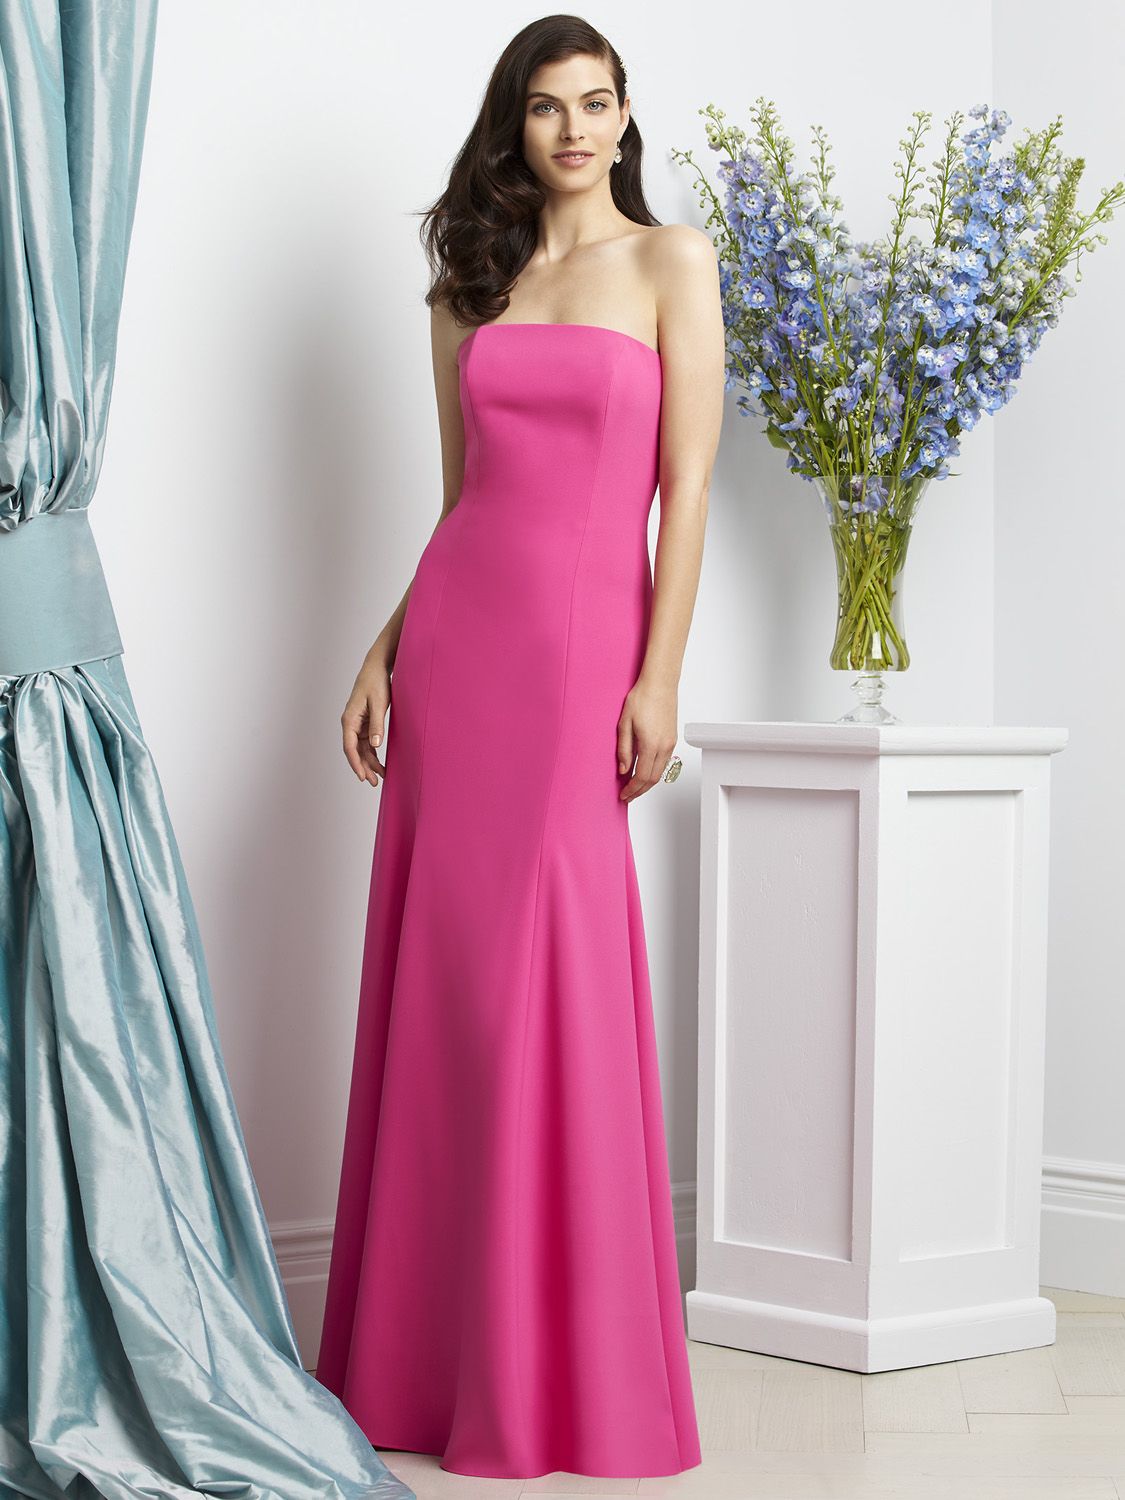 Dessy Collection 2935 Trumpet Bridesmaid Gown: French Novelty